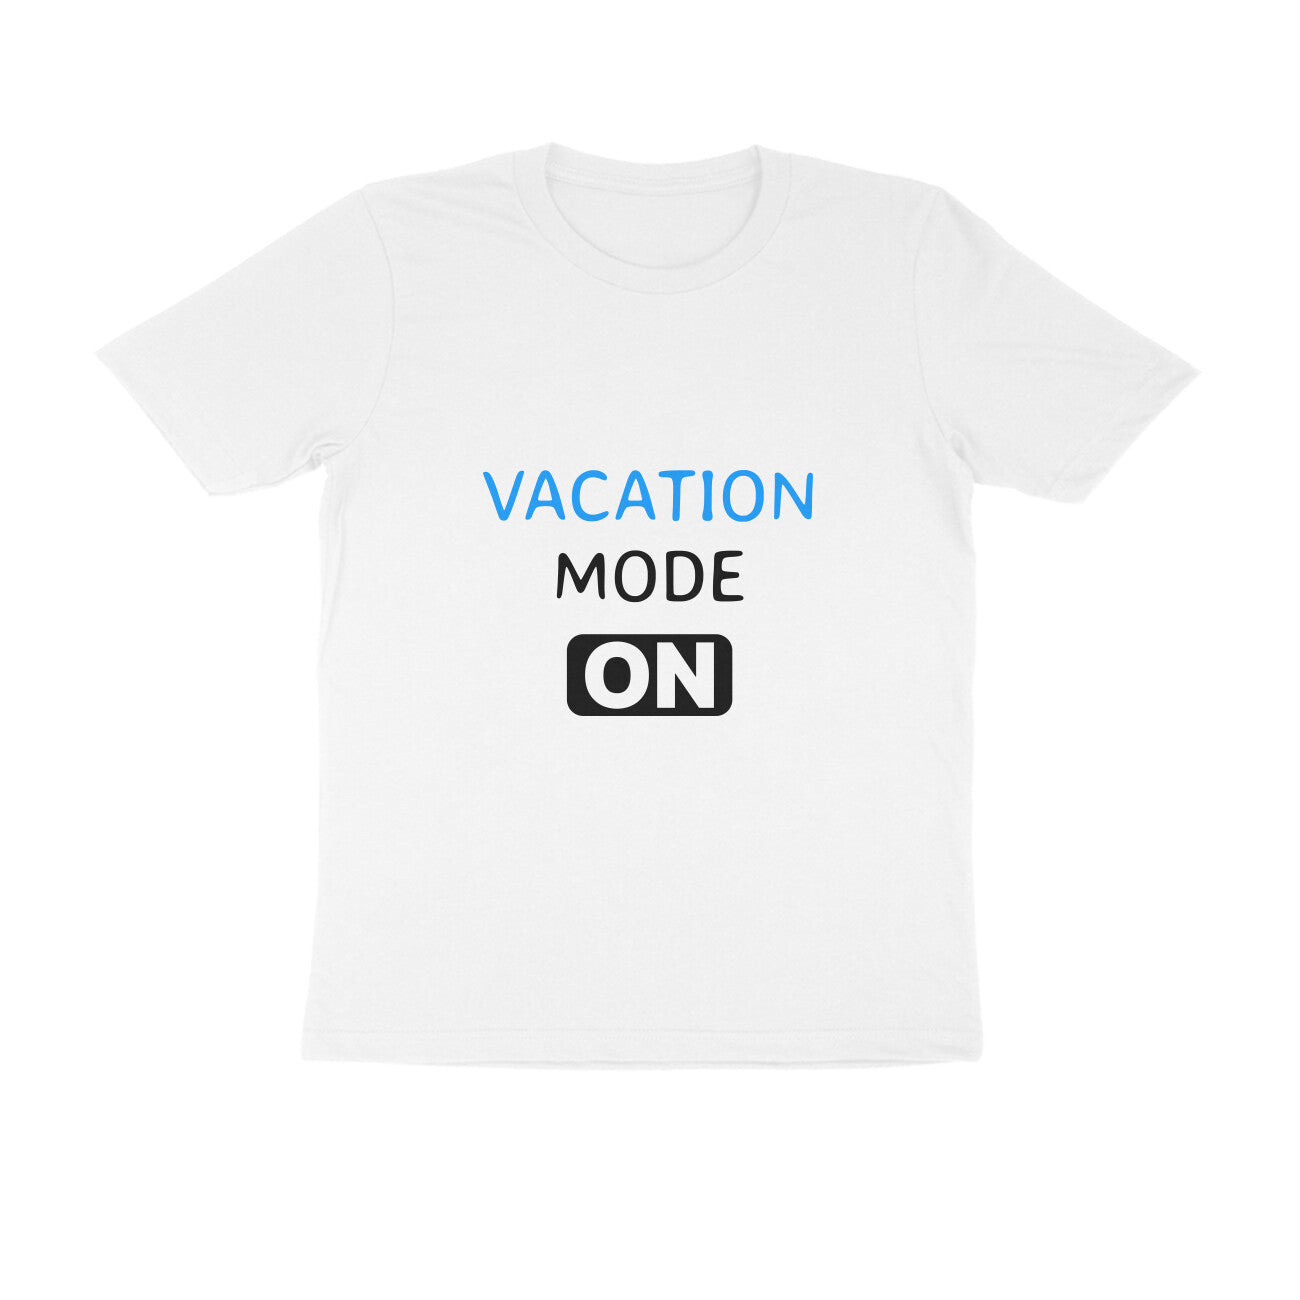 Vacation Mode ON Couples T-Shirts